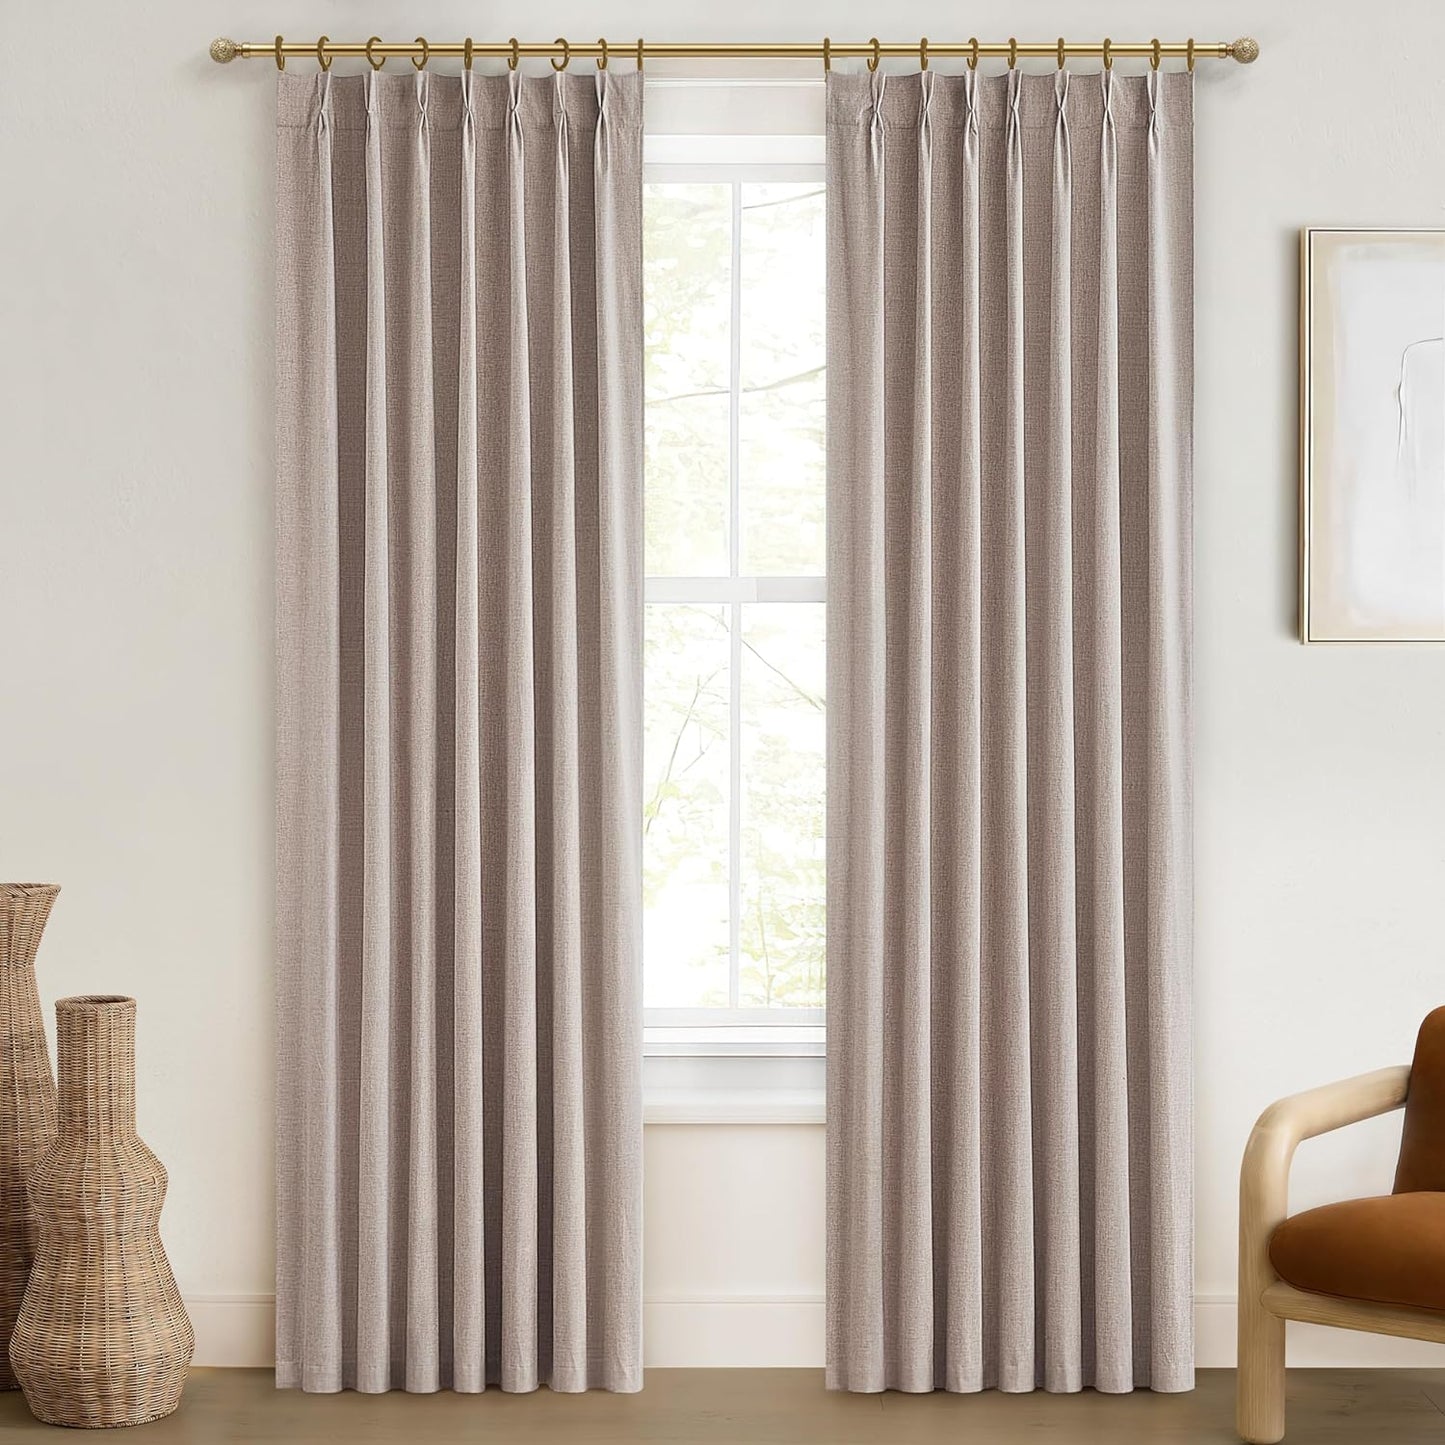 Natural Linen Pinch Pleated Blackout Curtains & Drapes 96 Inch Long Bedroom/Livingroom Farmhouse Curtains 2 Panel Sets, Neutral Track Room Darkening Thermal Insulated 8Ft Back Tab Window Curtain  QJmydeco Linen 40"W X 90"L X 2 Panels 